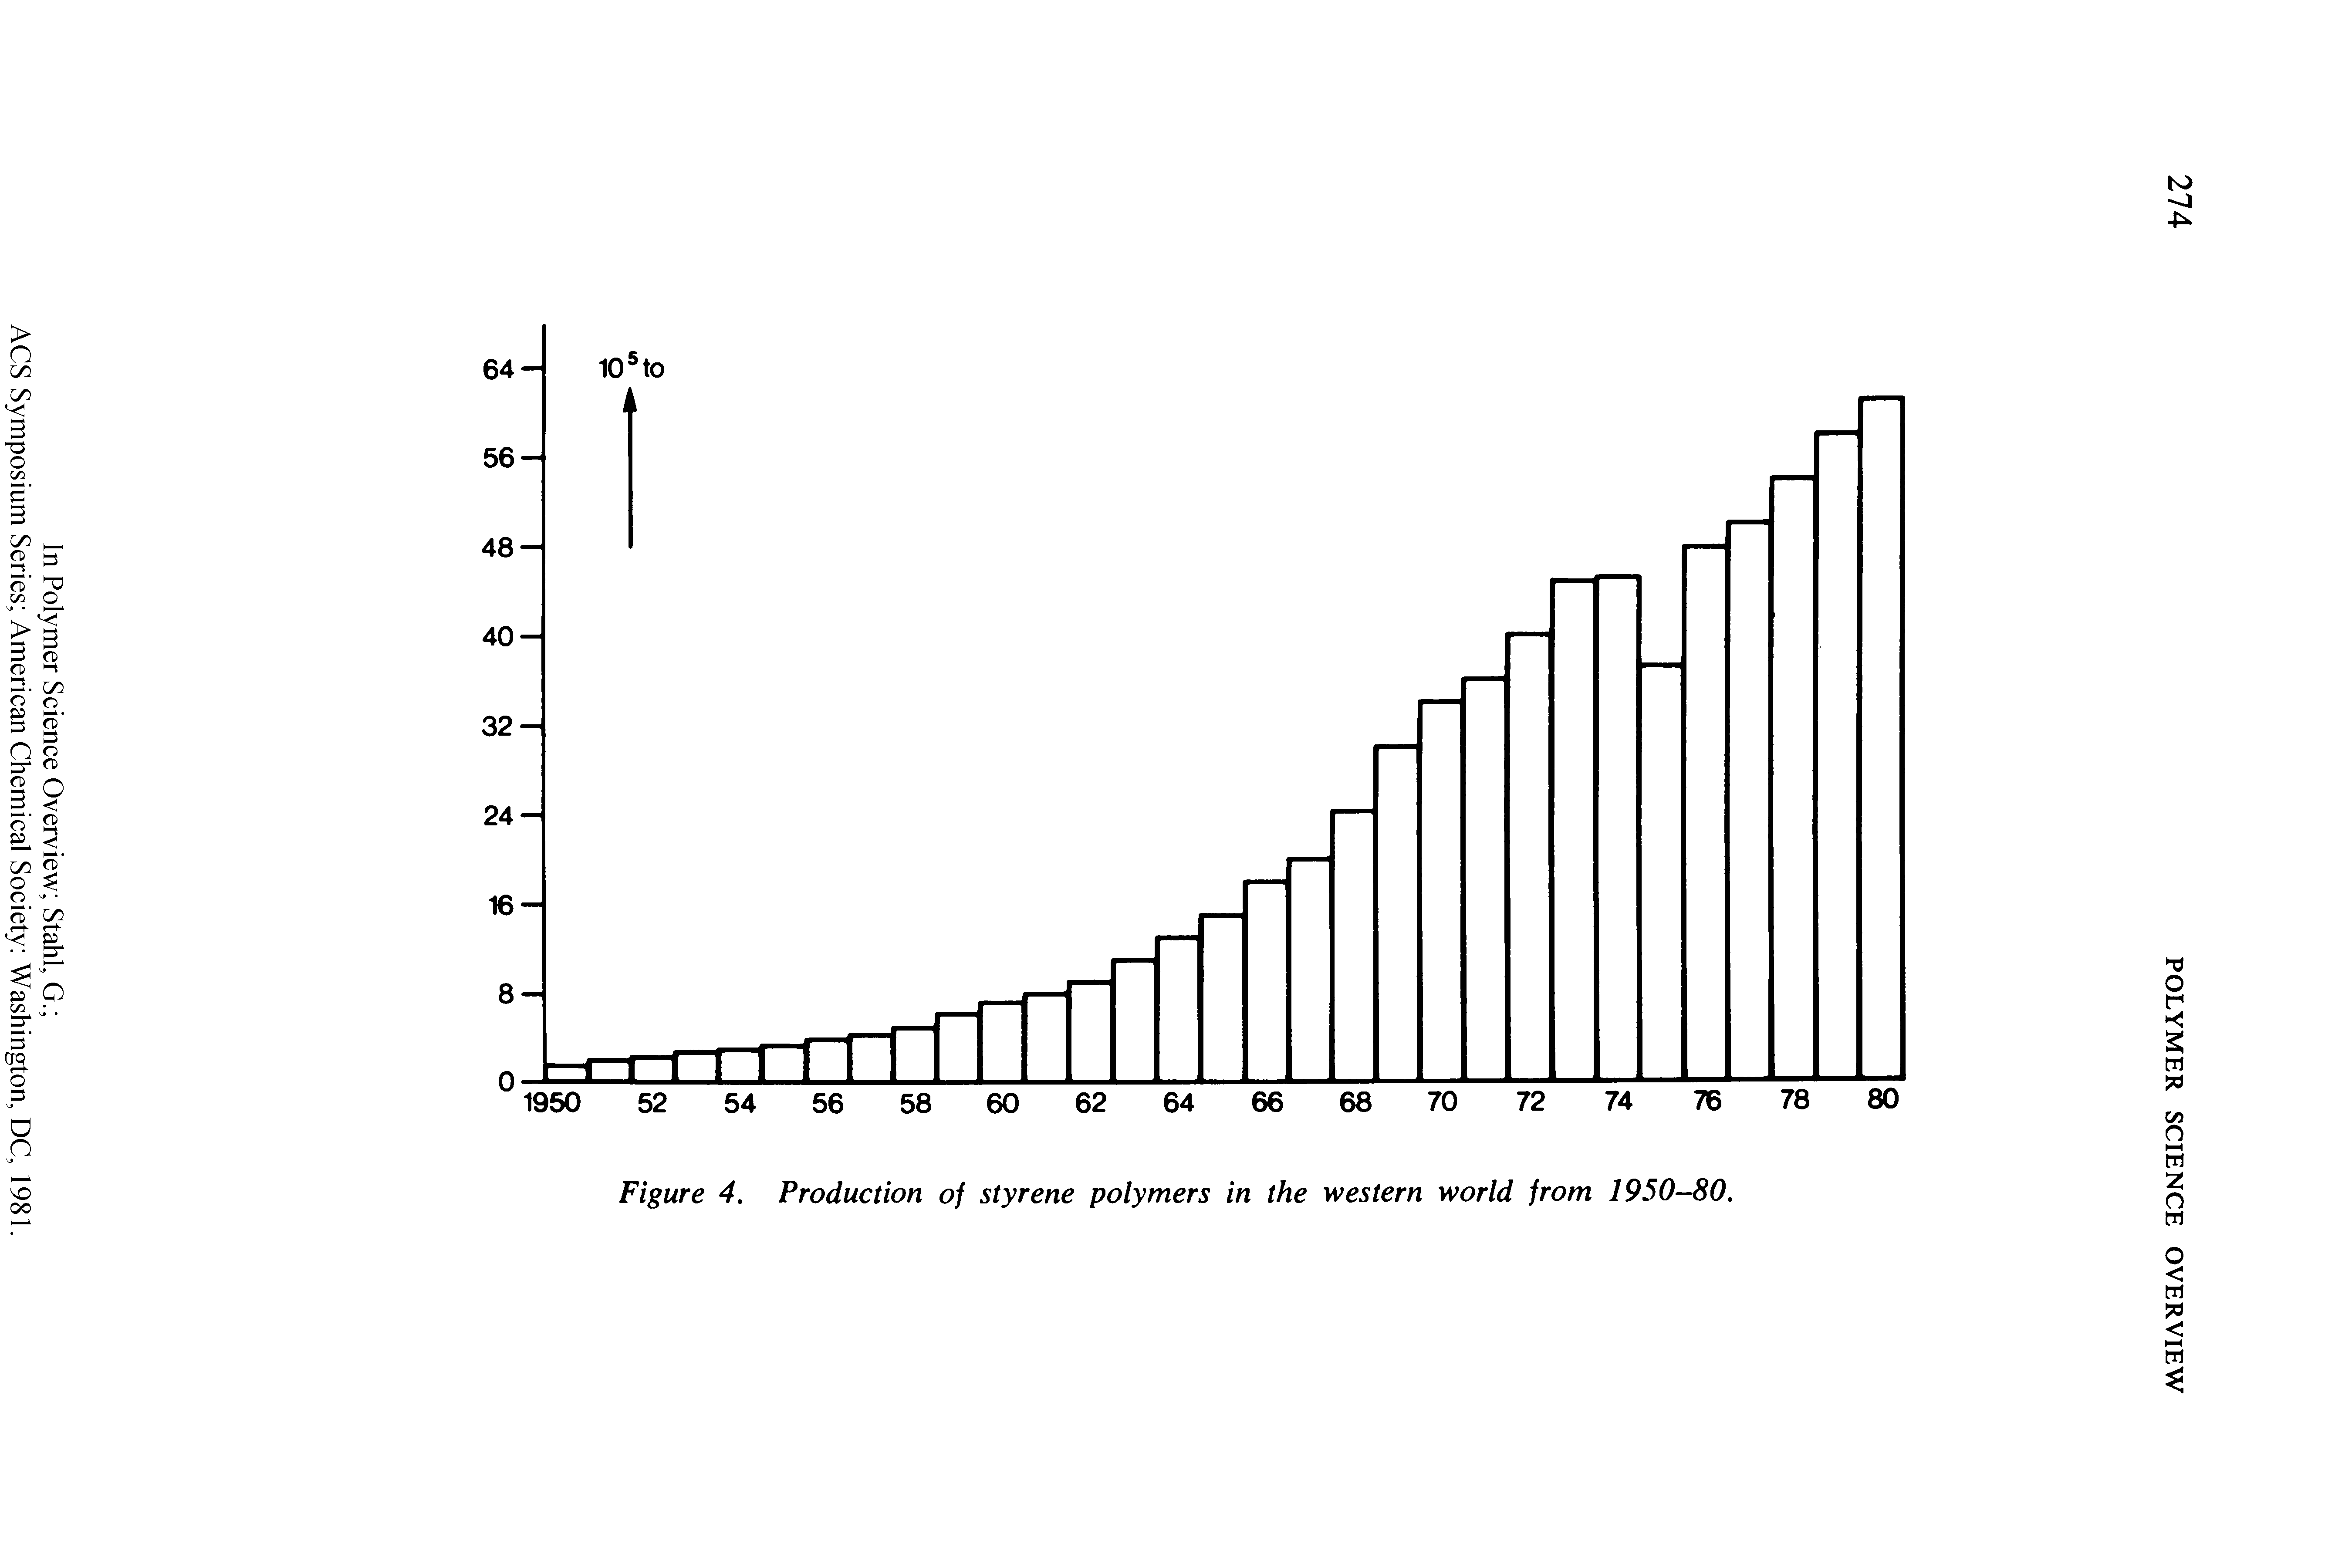 Figure 4. Production of styrene polymers in the western world from 1950-80.